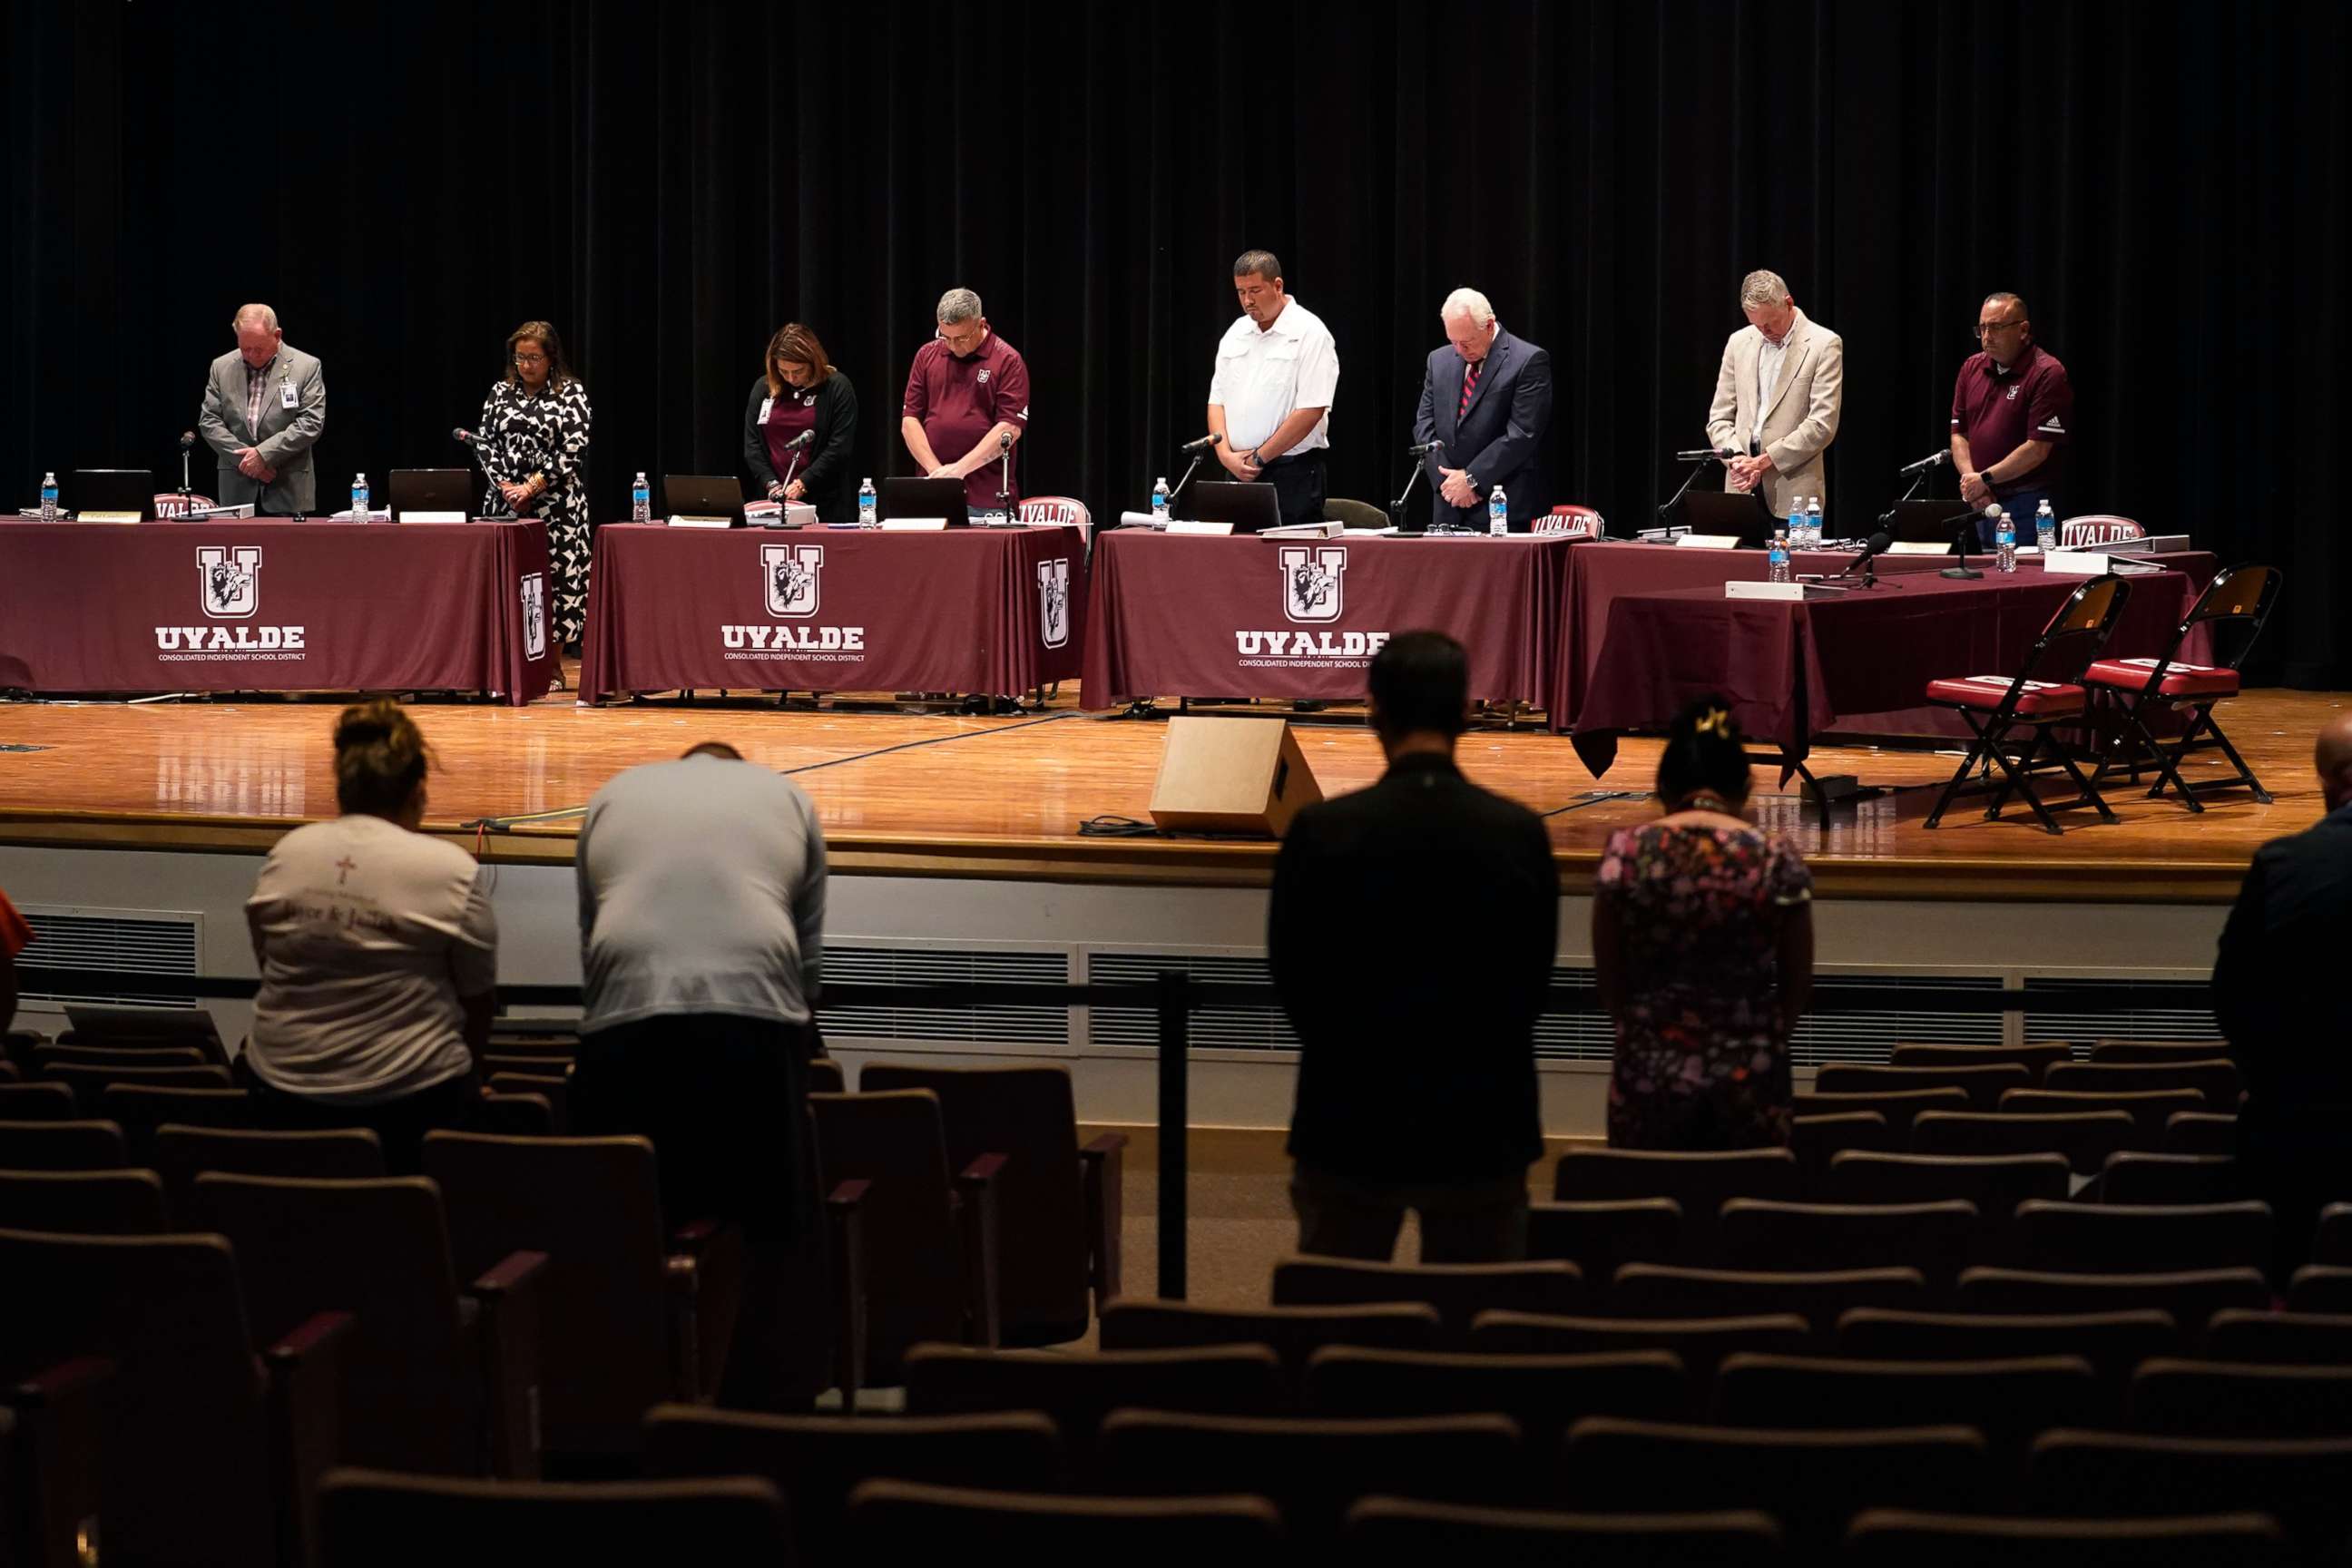 PHOTO: Dr. Hal Harrell, center, and members of the Board of Trustees of Uvalde Consolidated Independent School District stand for a moment of silence before a termination hearing in Uvalde, Texas, Aug. 24, 2022. 